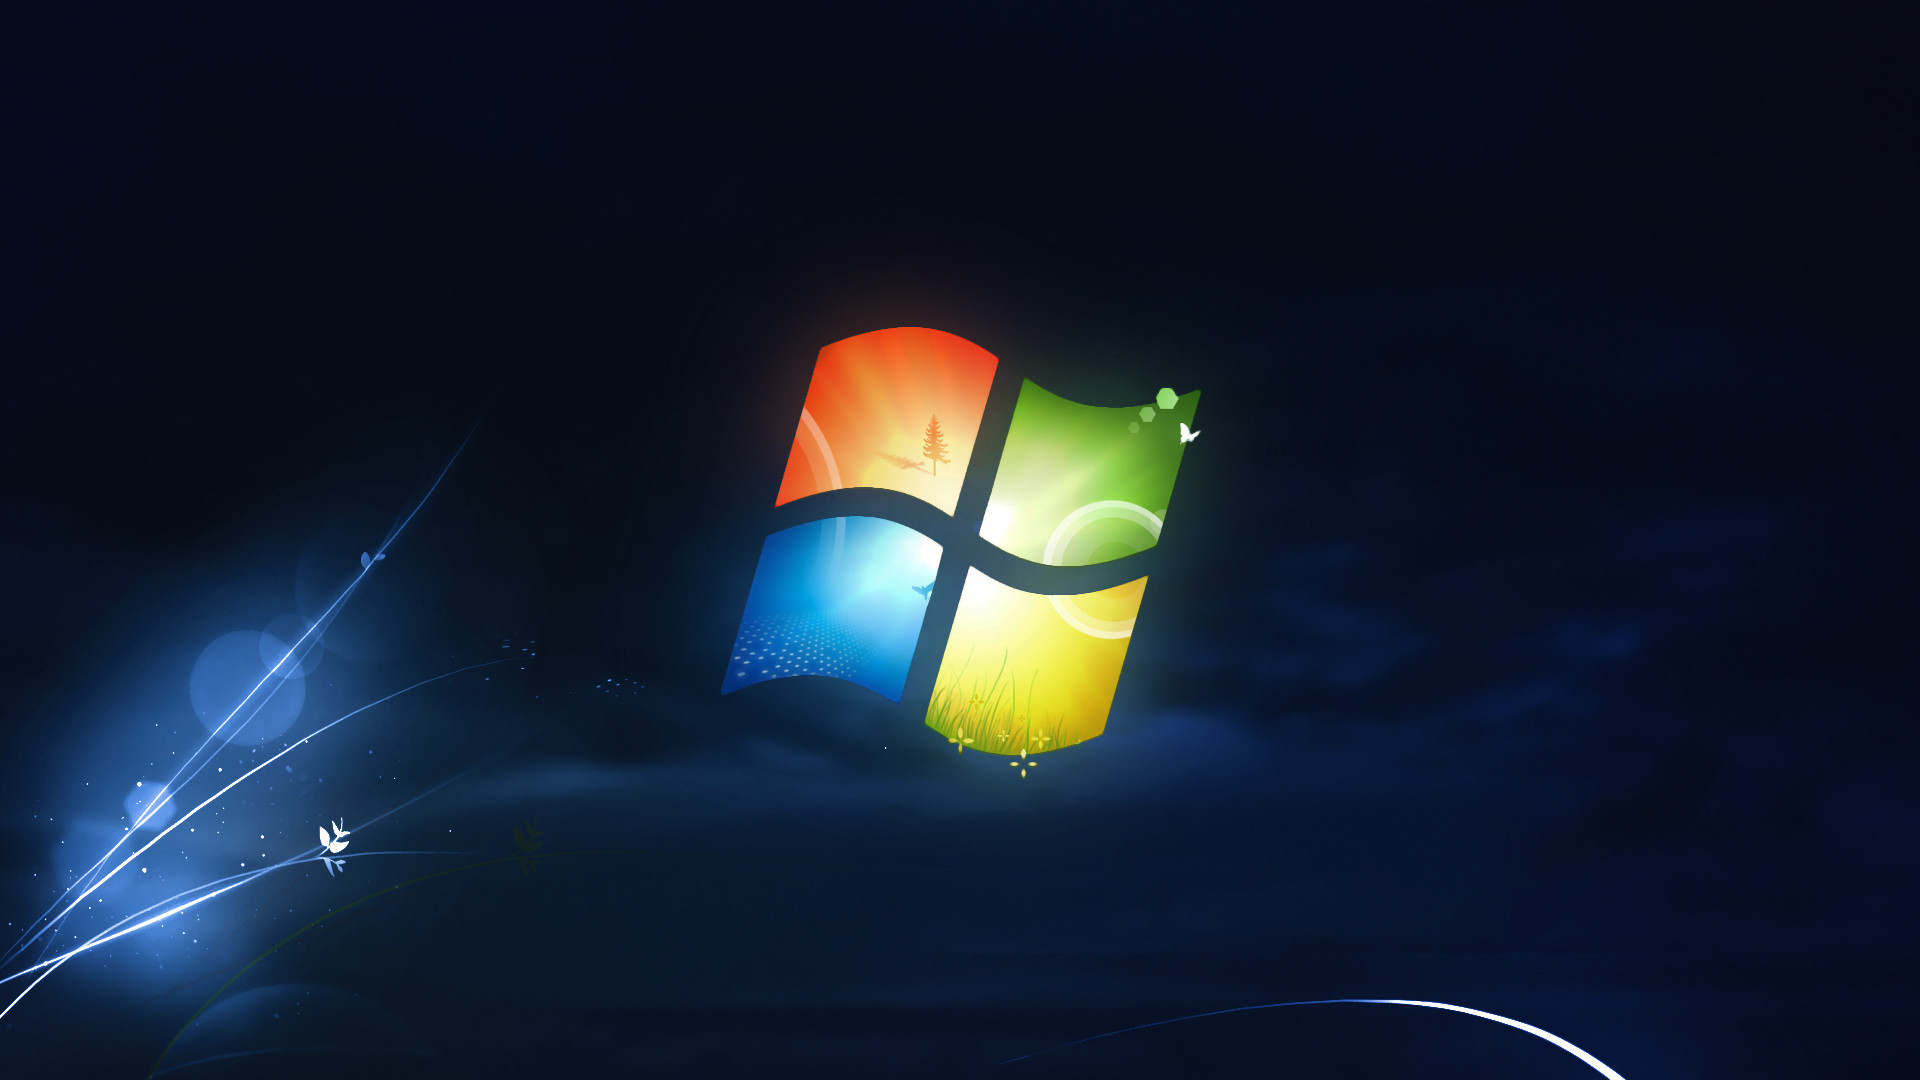 Microsoft Backgrounds | Download HD Wallpapers